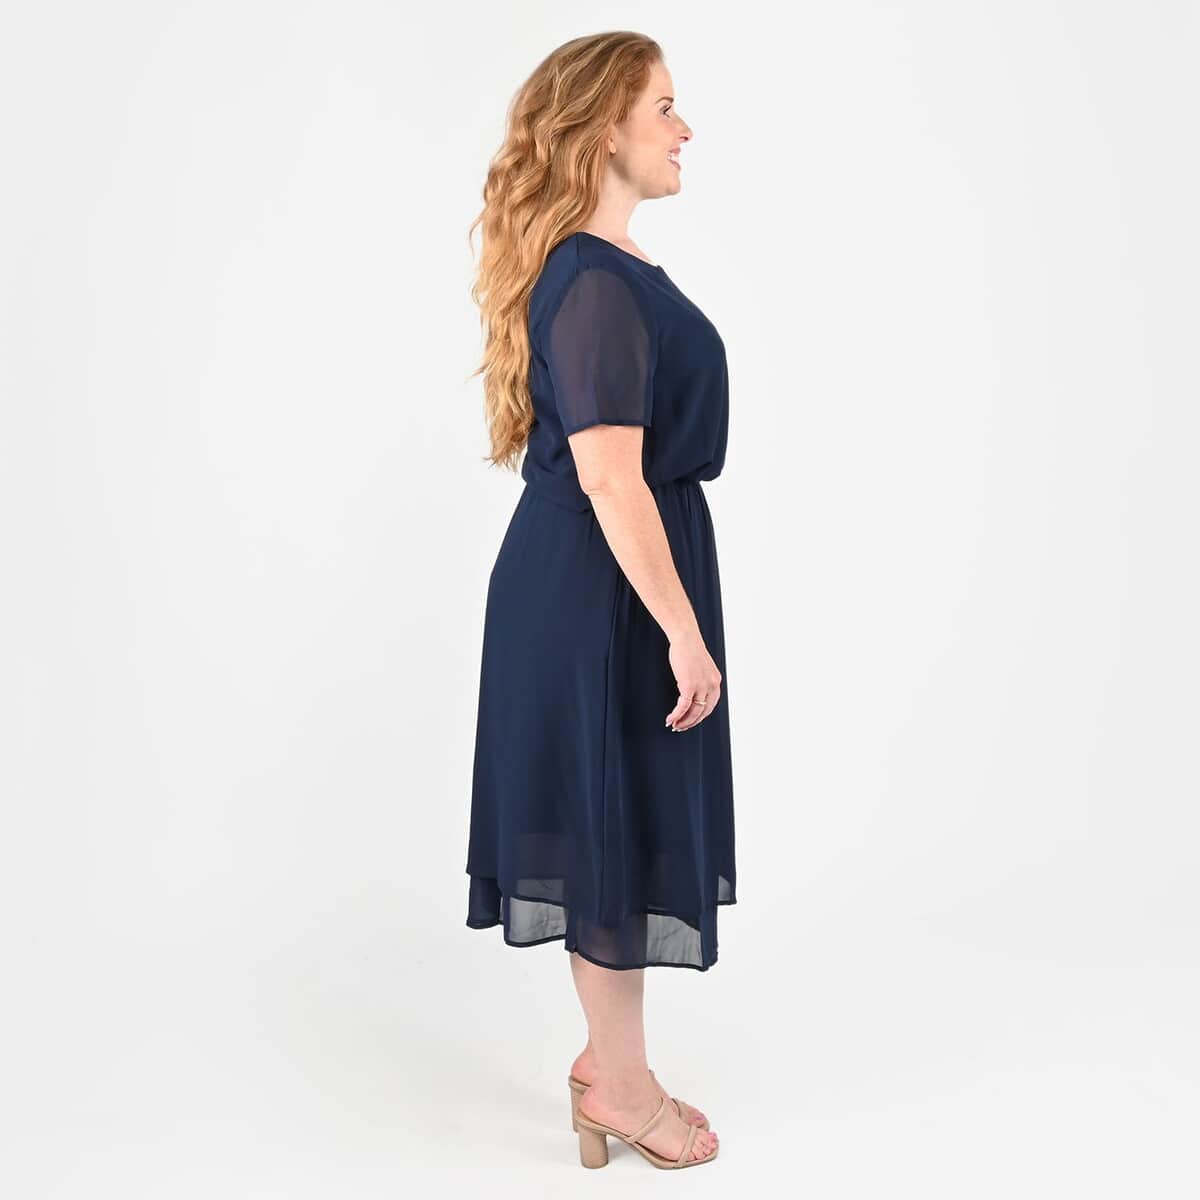 TAMSY Navy 2-piece Chiffon Skirt Set - L image number 2